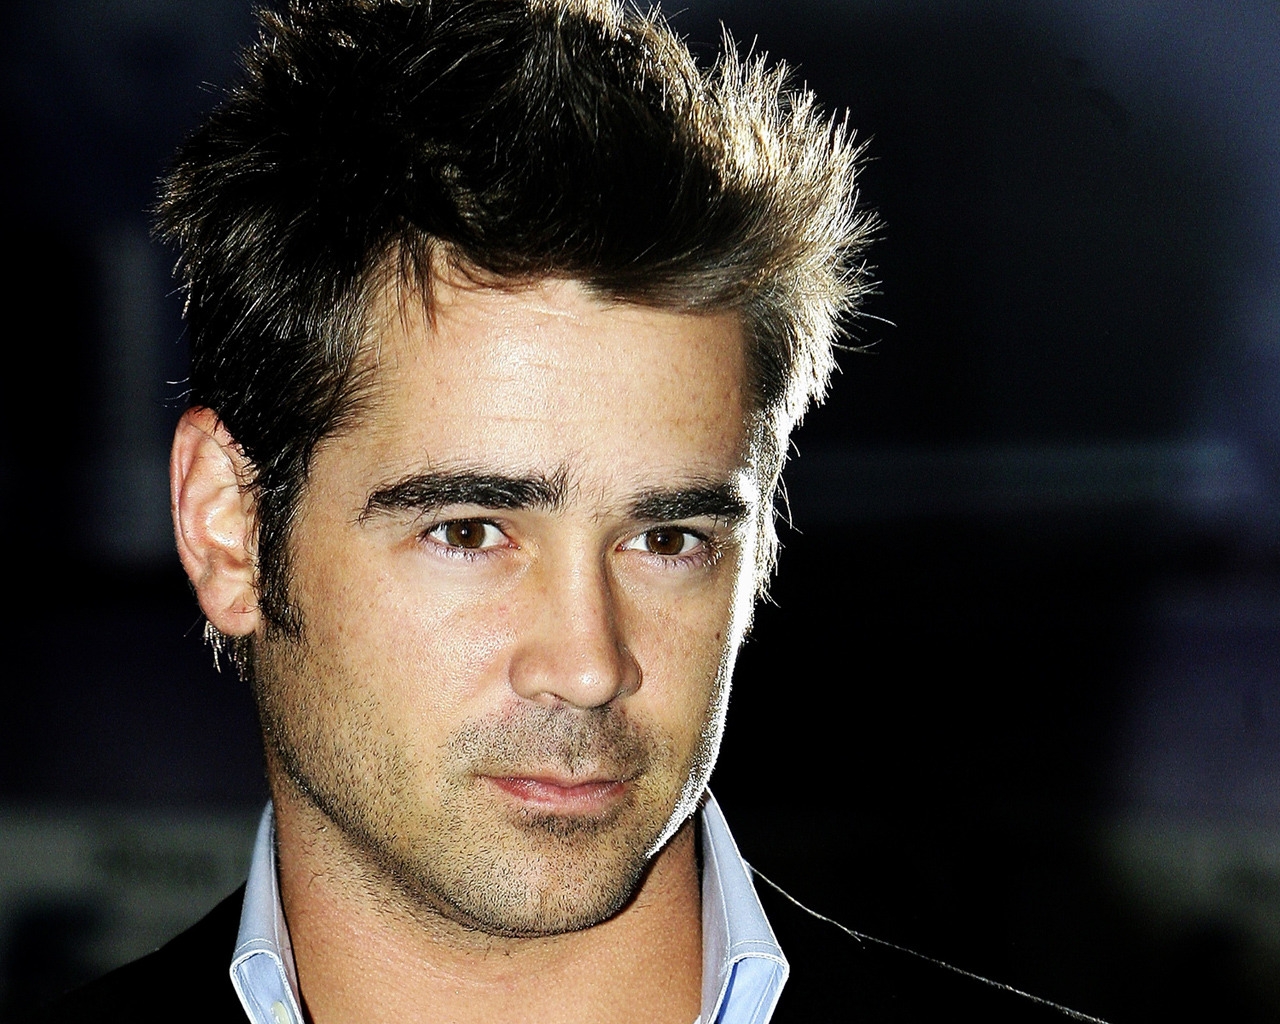 Colin James Farrell for 1280 x 1024 resolution